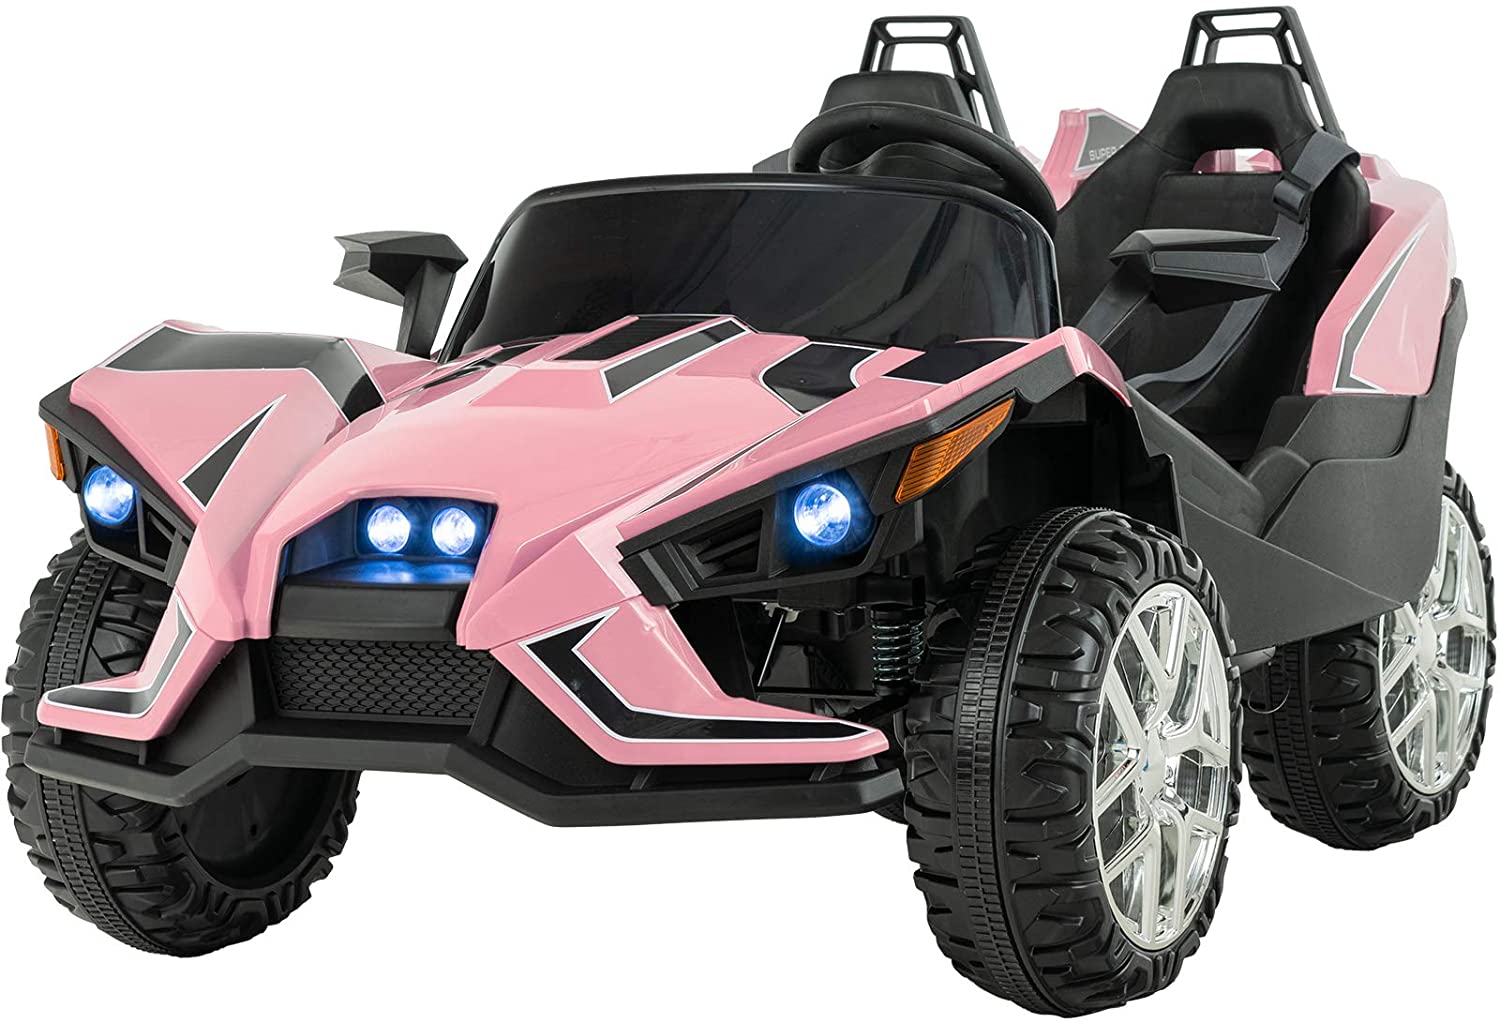 Uenjoy 2 Seats Kids Car 12V Ride On Racer Cars Battery Operated Electric Cars w/ 2.4G Remote Control,Spring Suspension Wheels,4 Speeds,LED Lights,Music,Bluetooth,AUX Cord,USB Port,Pink